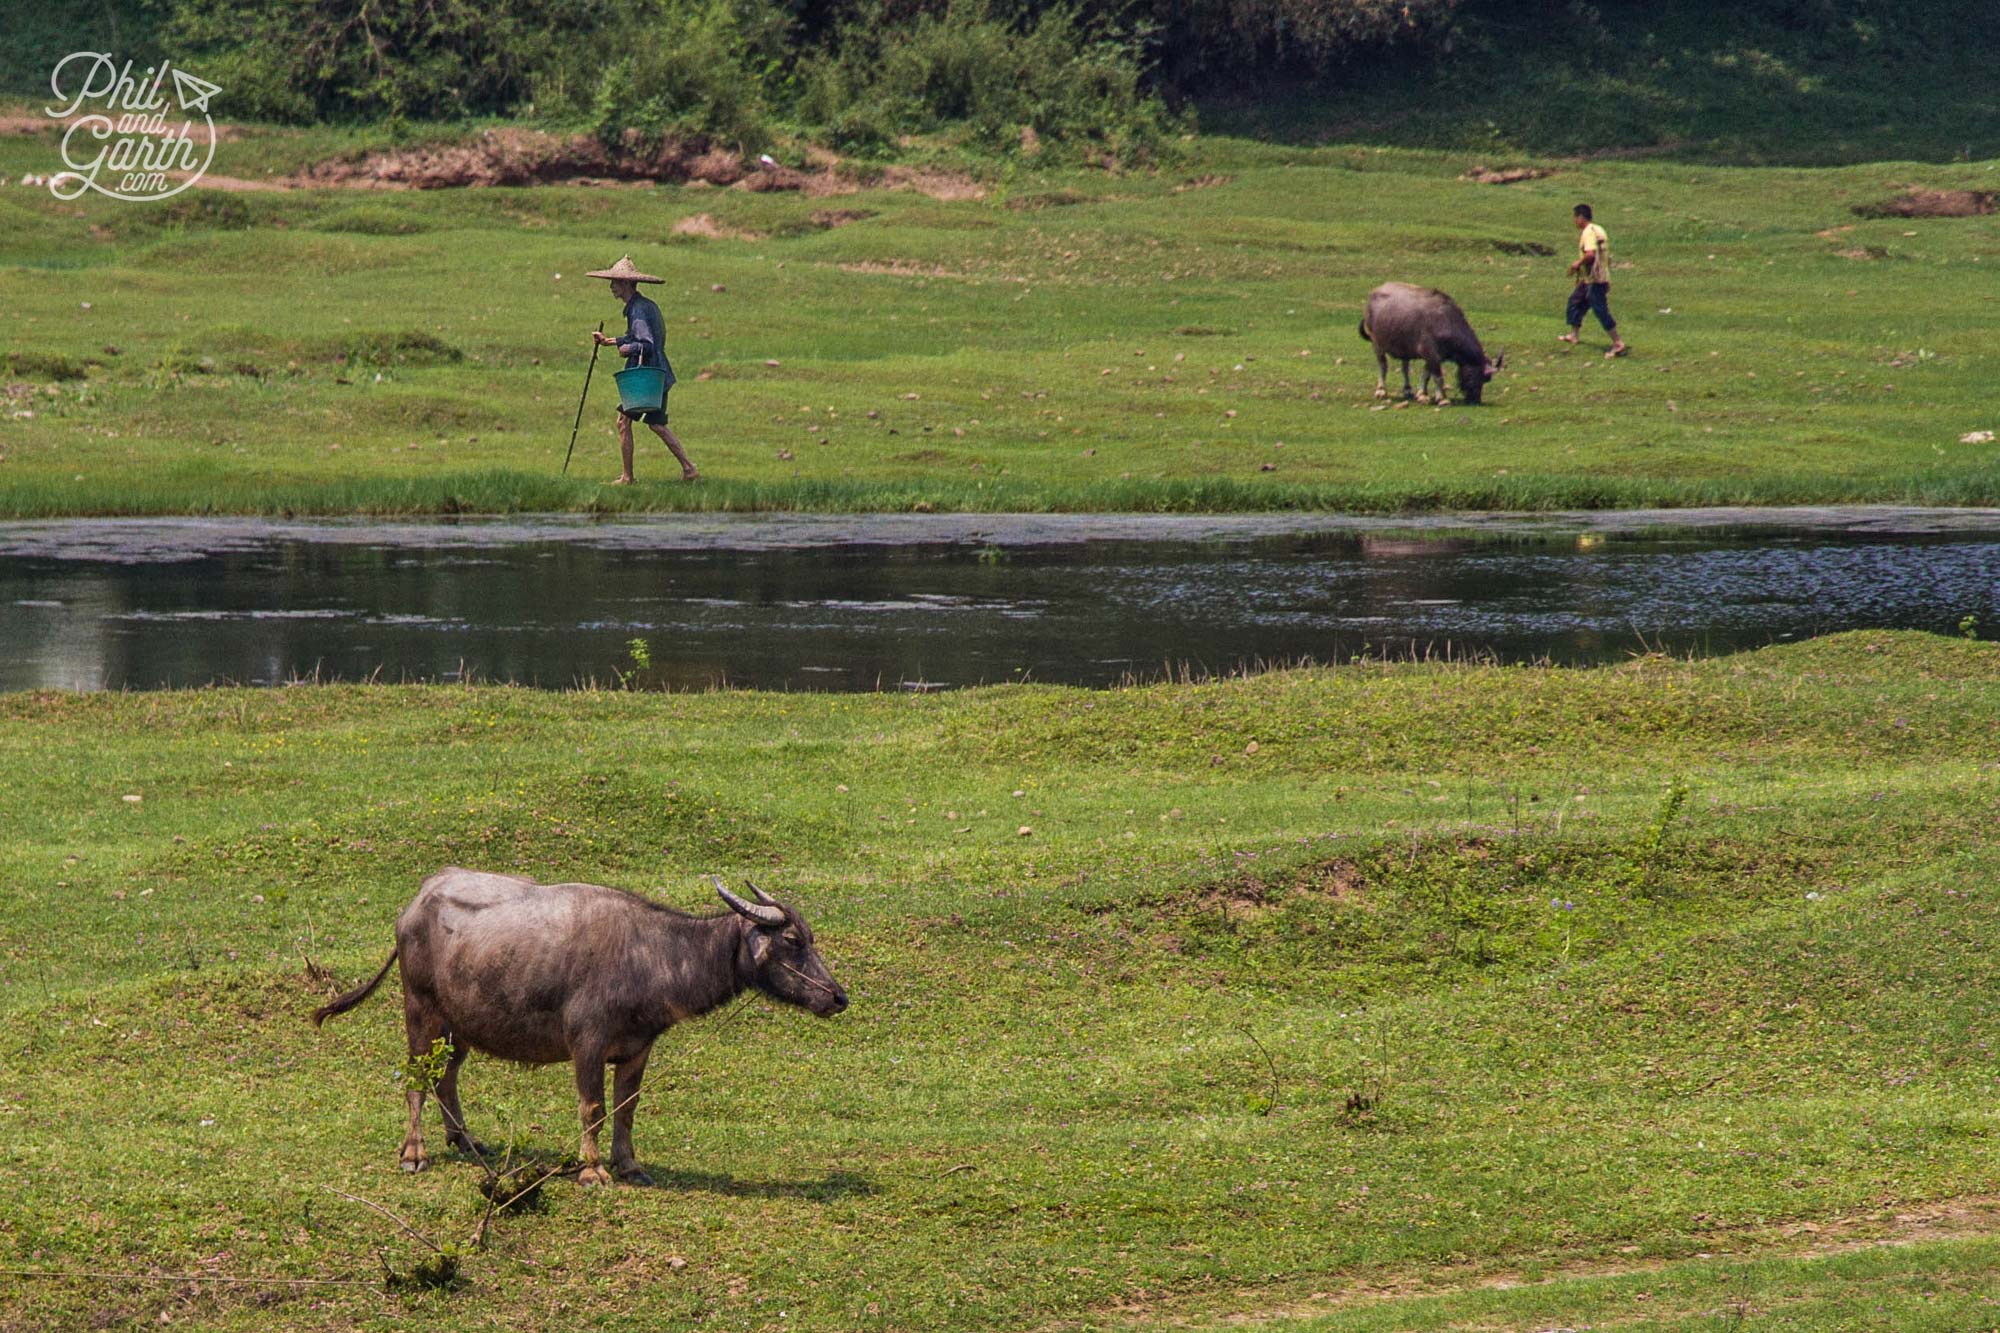 Farmers and their water buffalo along the banks of the Li River